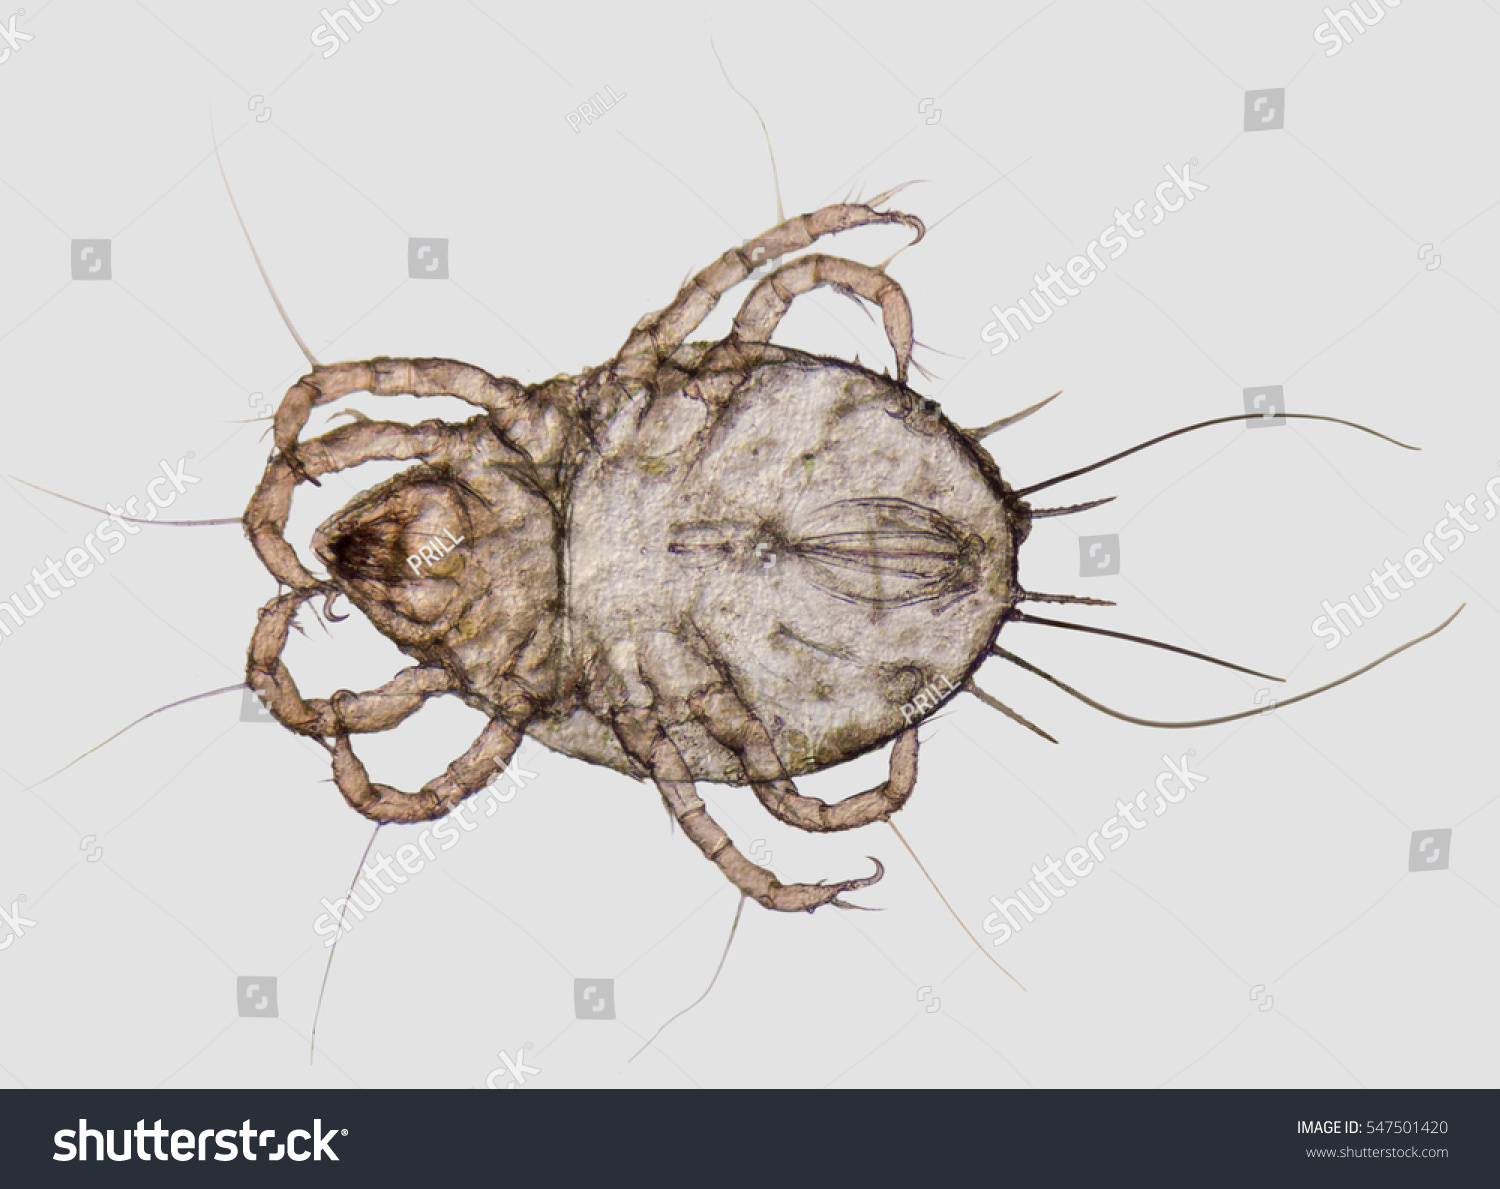 microscopic shot showing a house dust mite #547501420